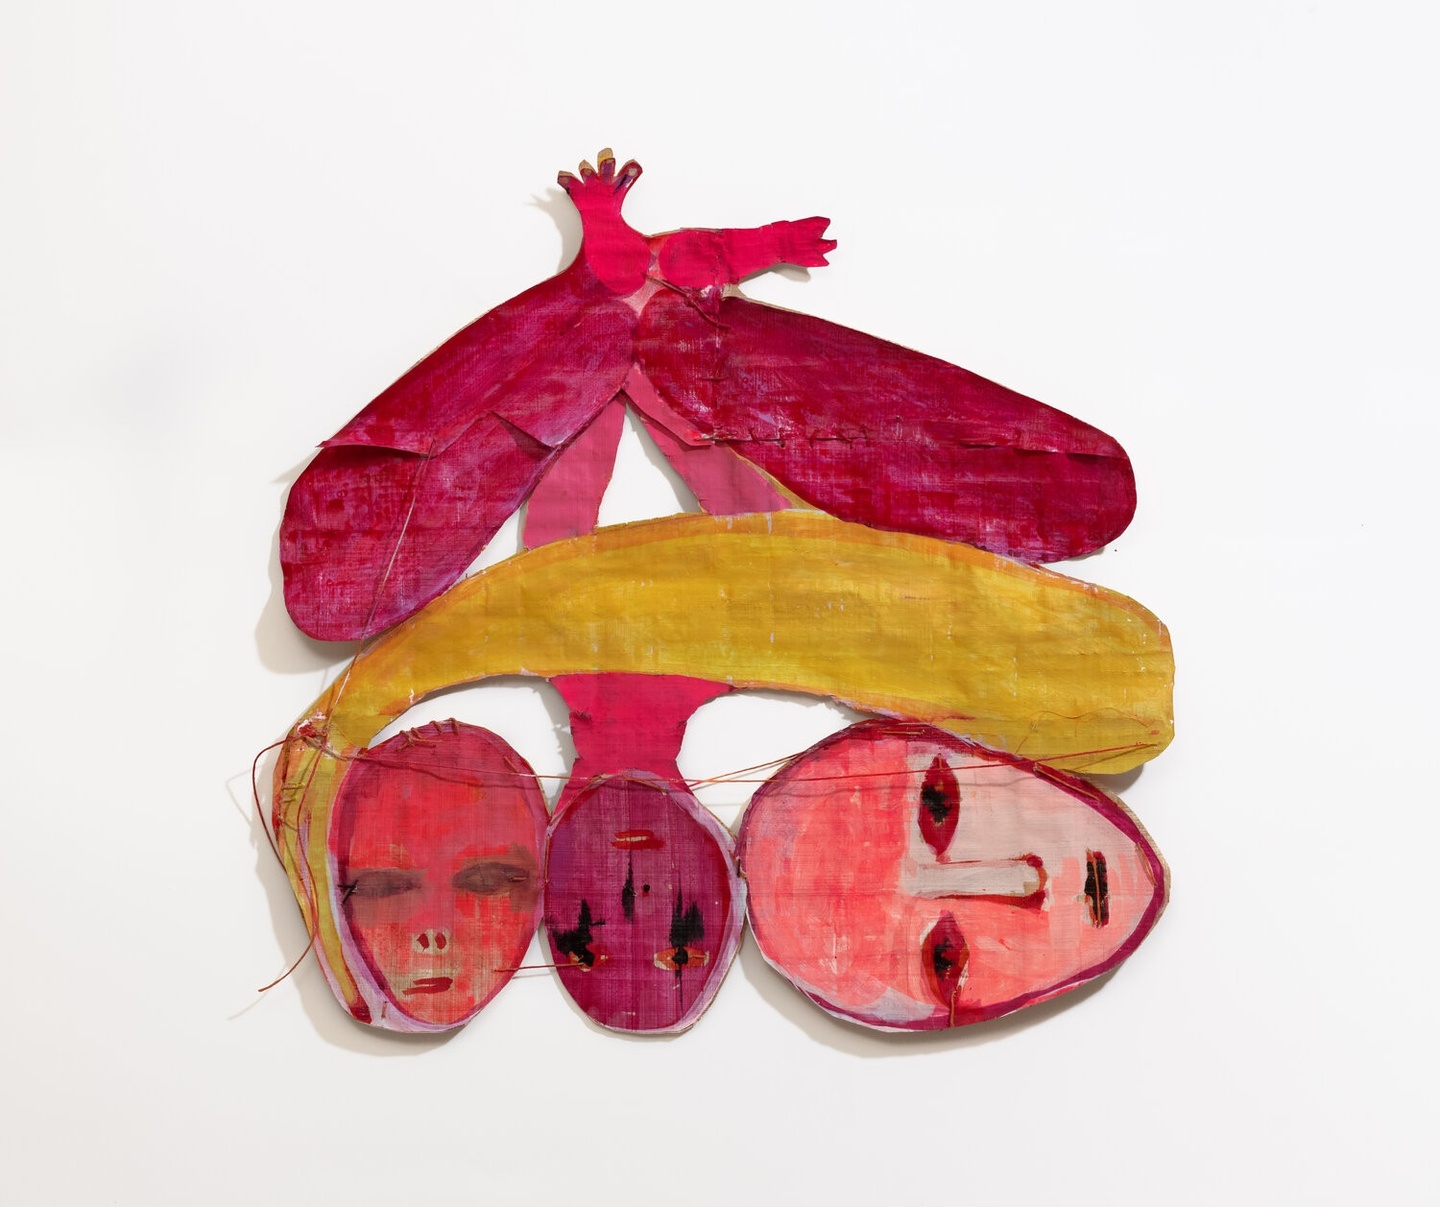 Mixed media painting in bright pinks, reds, and gold, featuring three heads at the bottom—one upright, one upside down, one sideways—under elongated shapes up top, made out of ink and thread on papyrus.